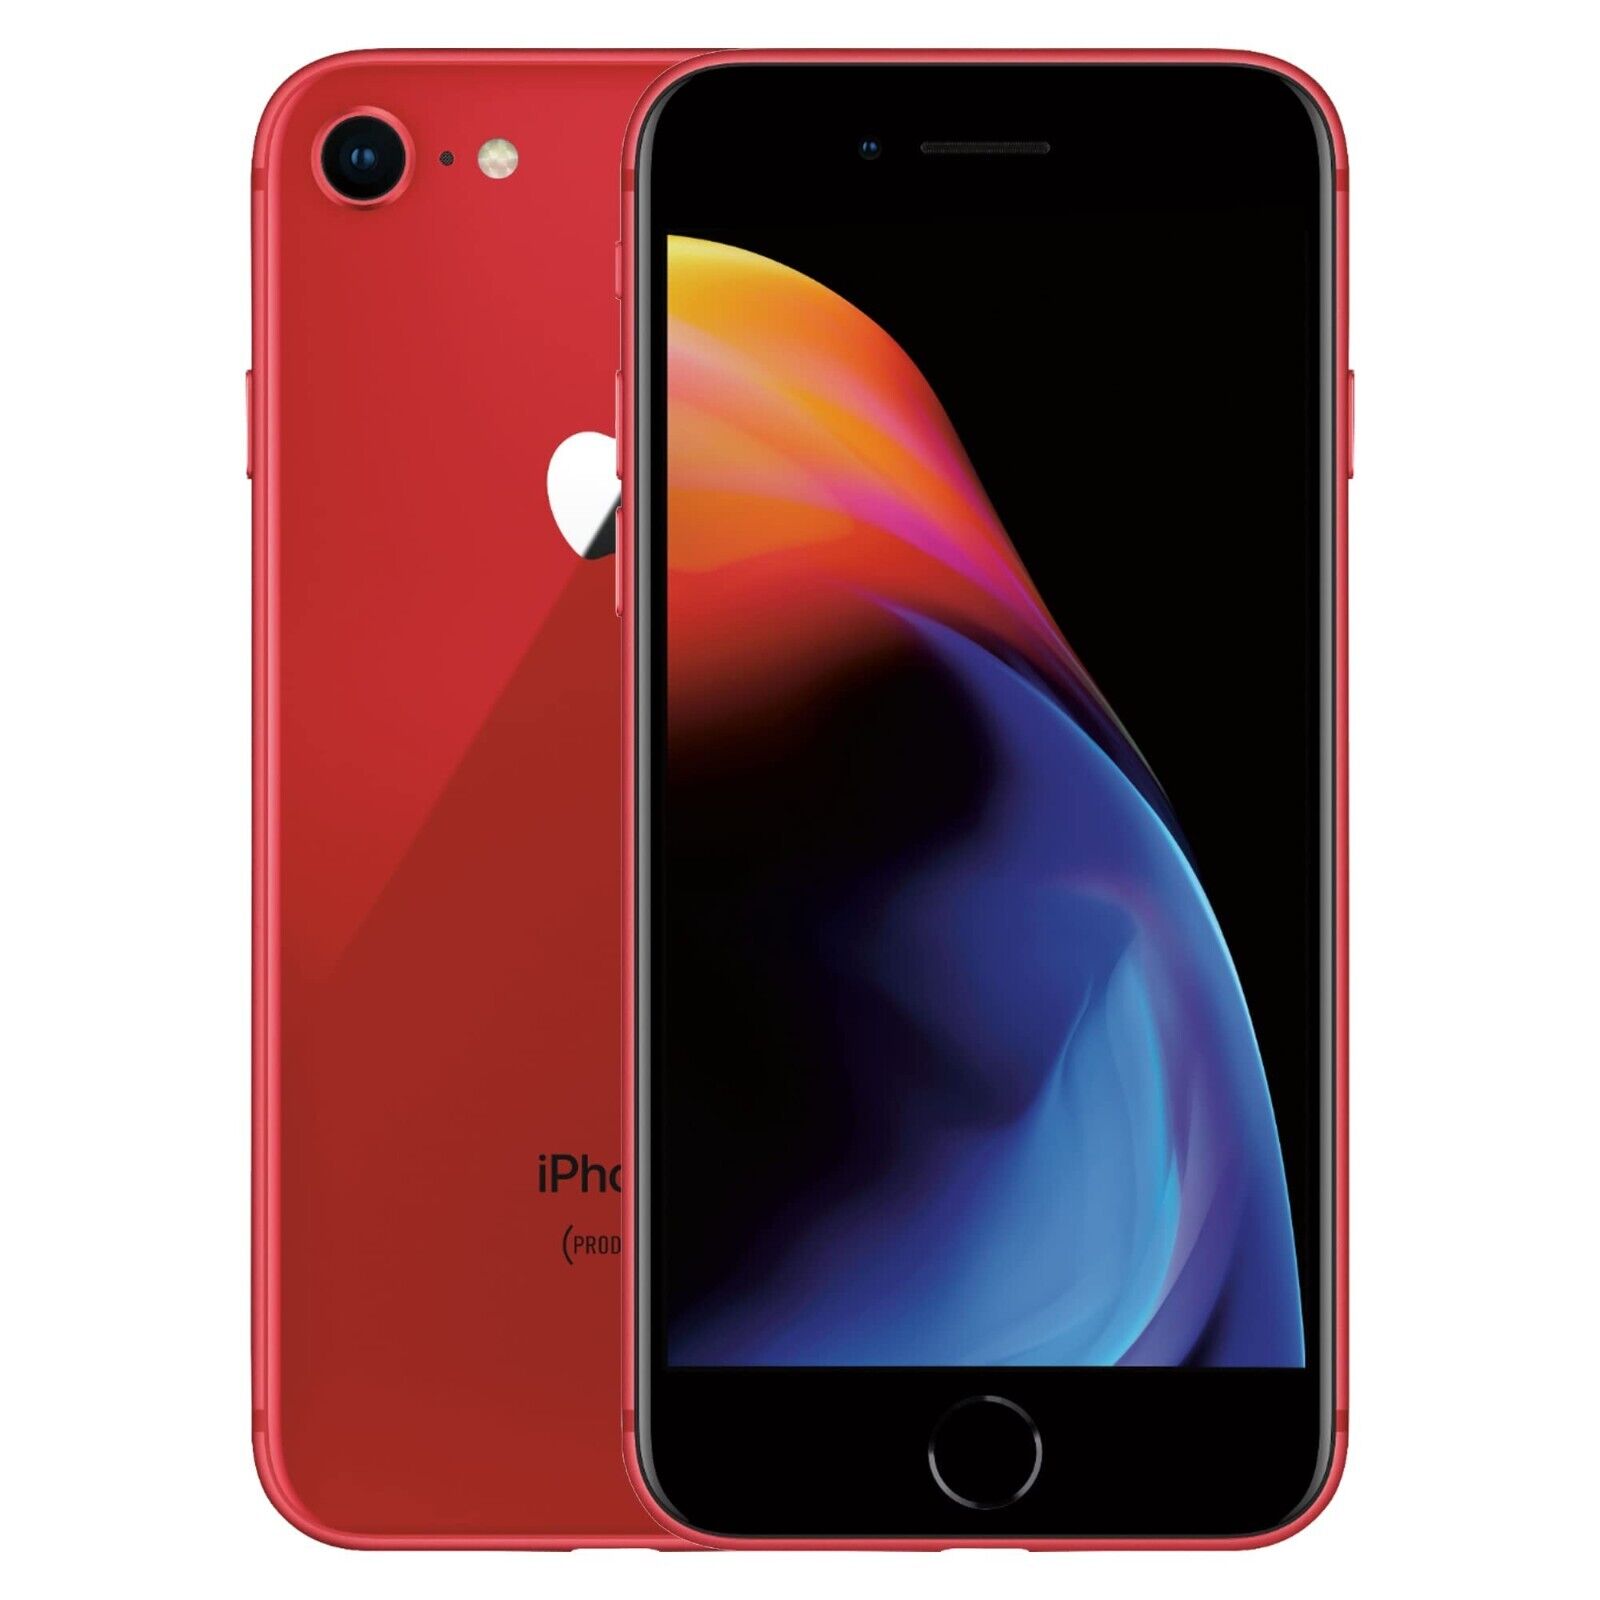 Apple iPhone 8 (4.7-inch) Smartphone (A1863) Unlocked - 64GB / Red Refurbished 1